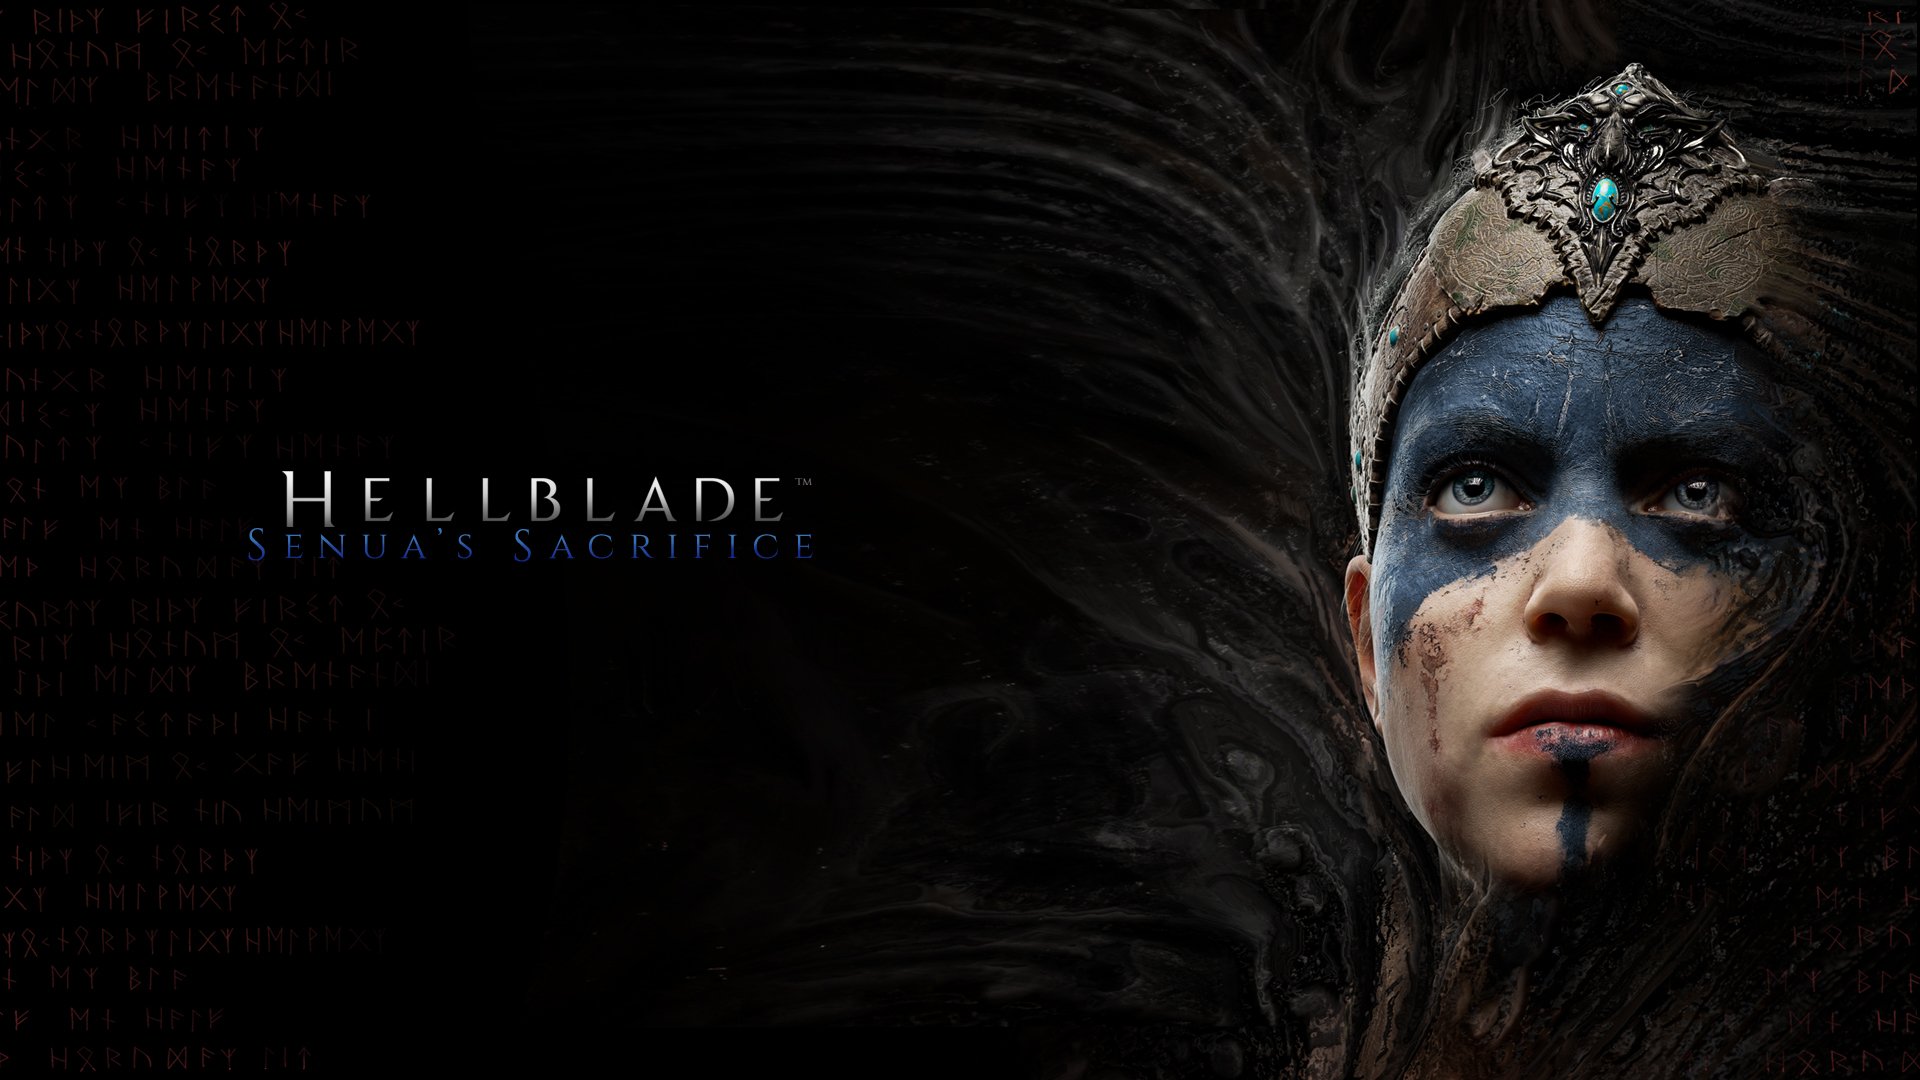 A reply to Mic.com’s: ‘Hellblade’ tries to show the real experience of psychosis – but ends up using it as a plot device.